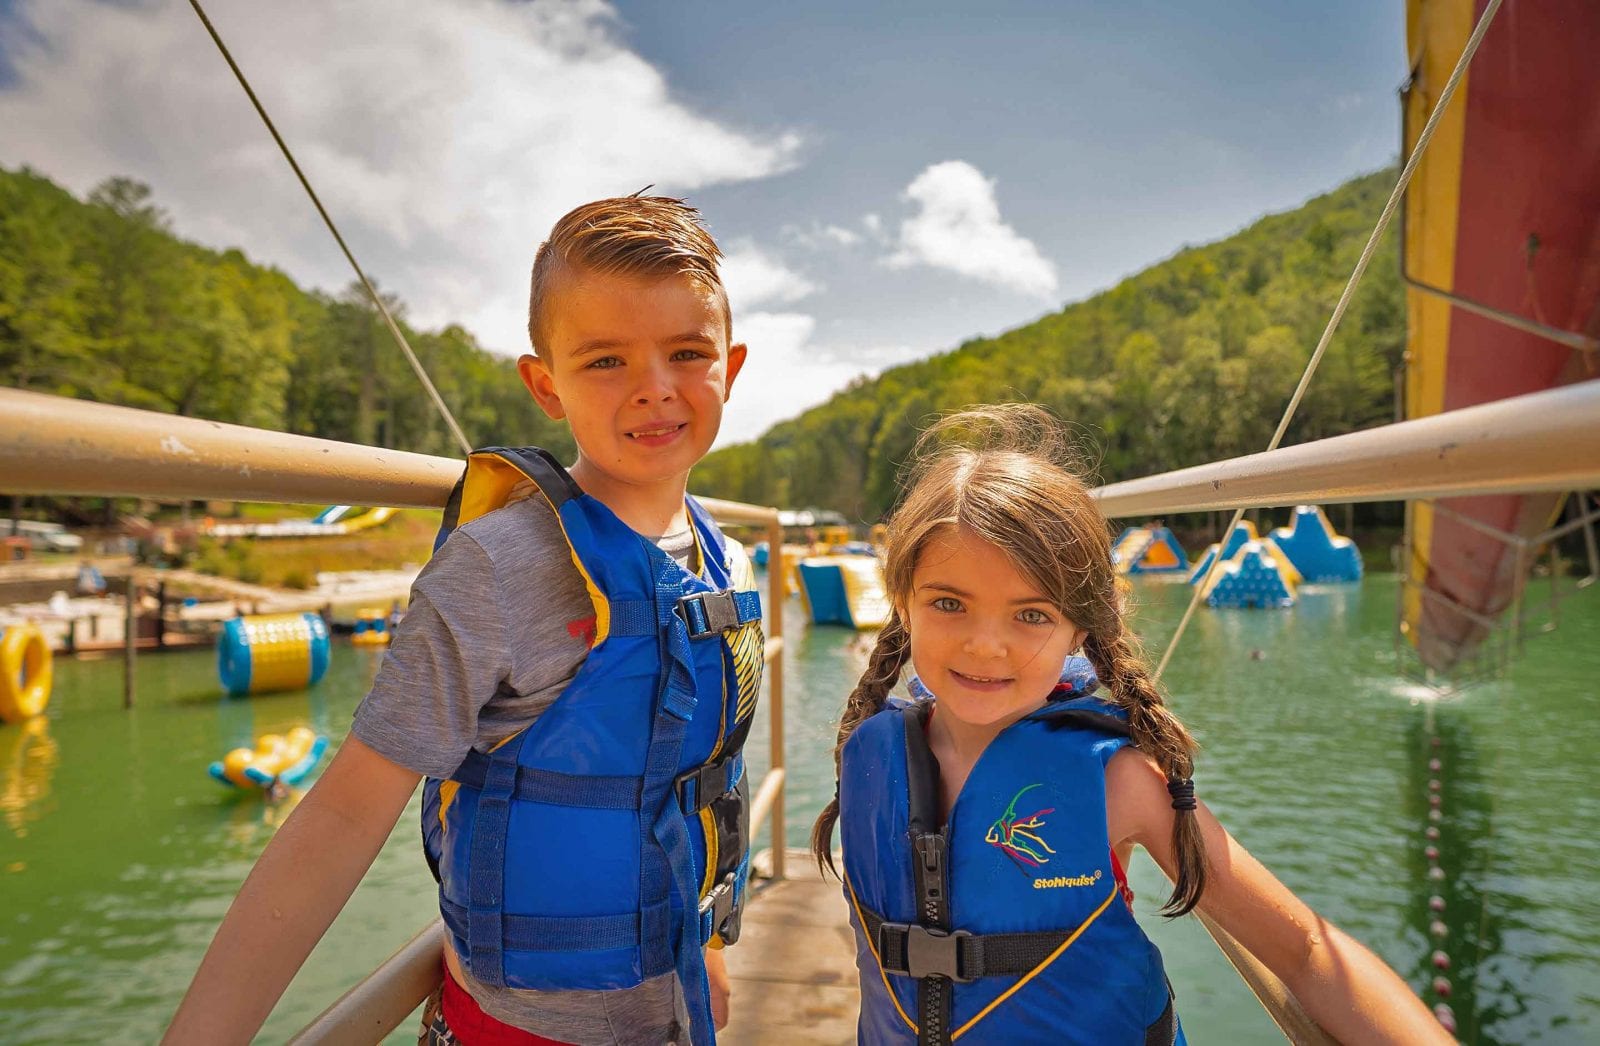 Best Places to Go on July 4th: ACE Adventure Resort